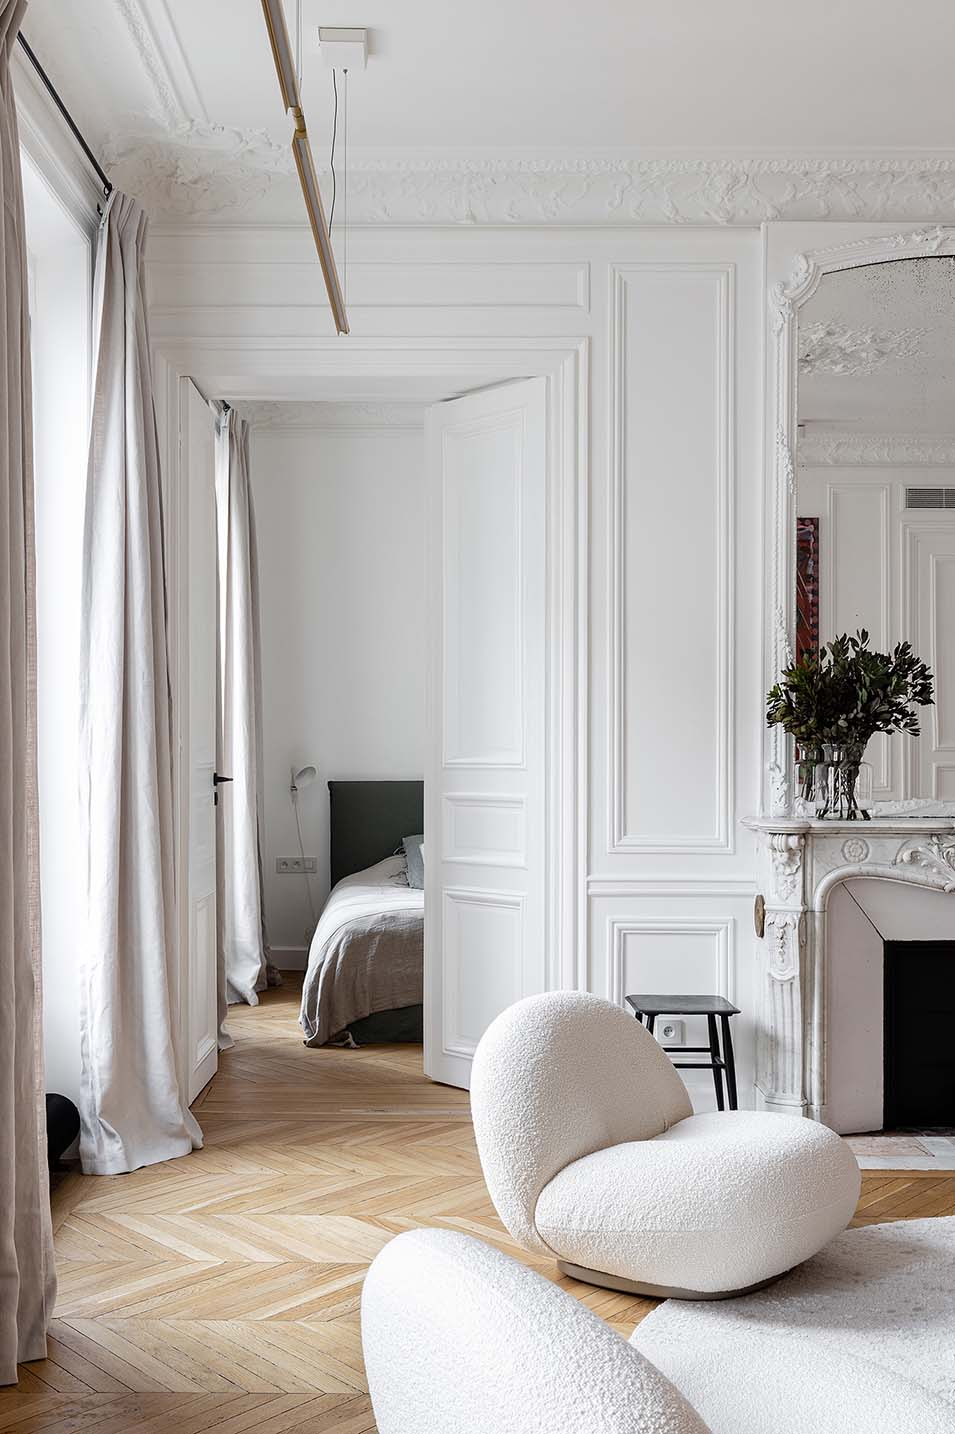 Contact an interior designer in Toulouse and in Haute-Garonne